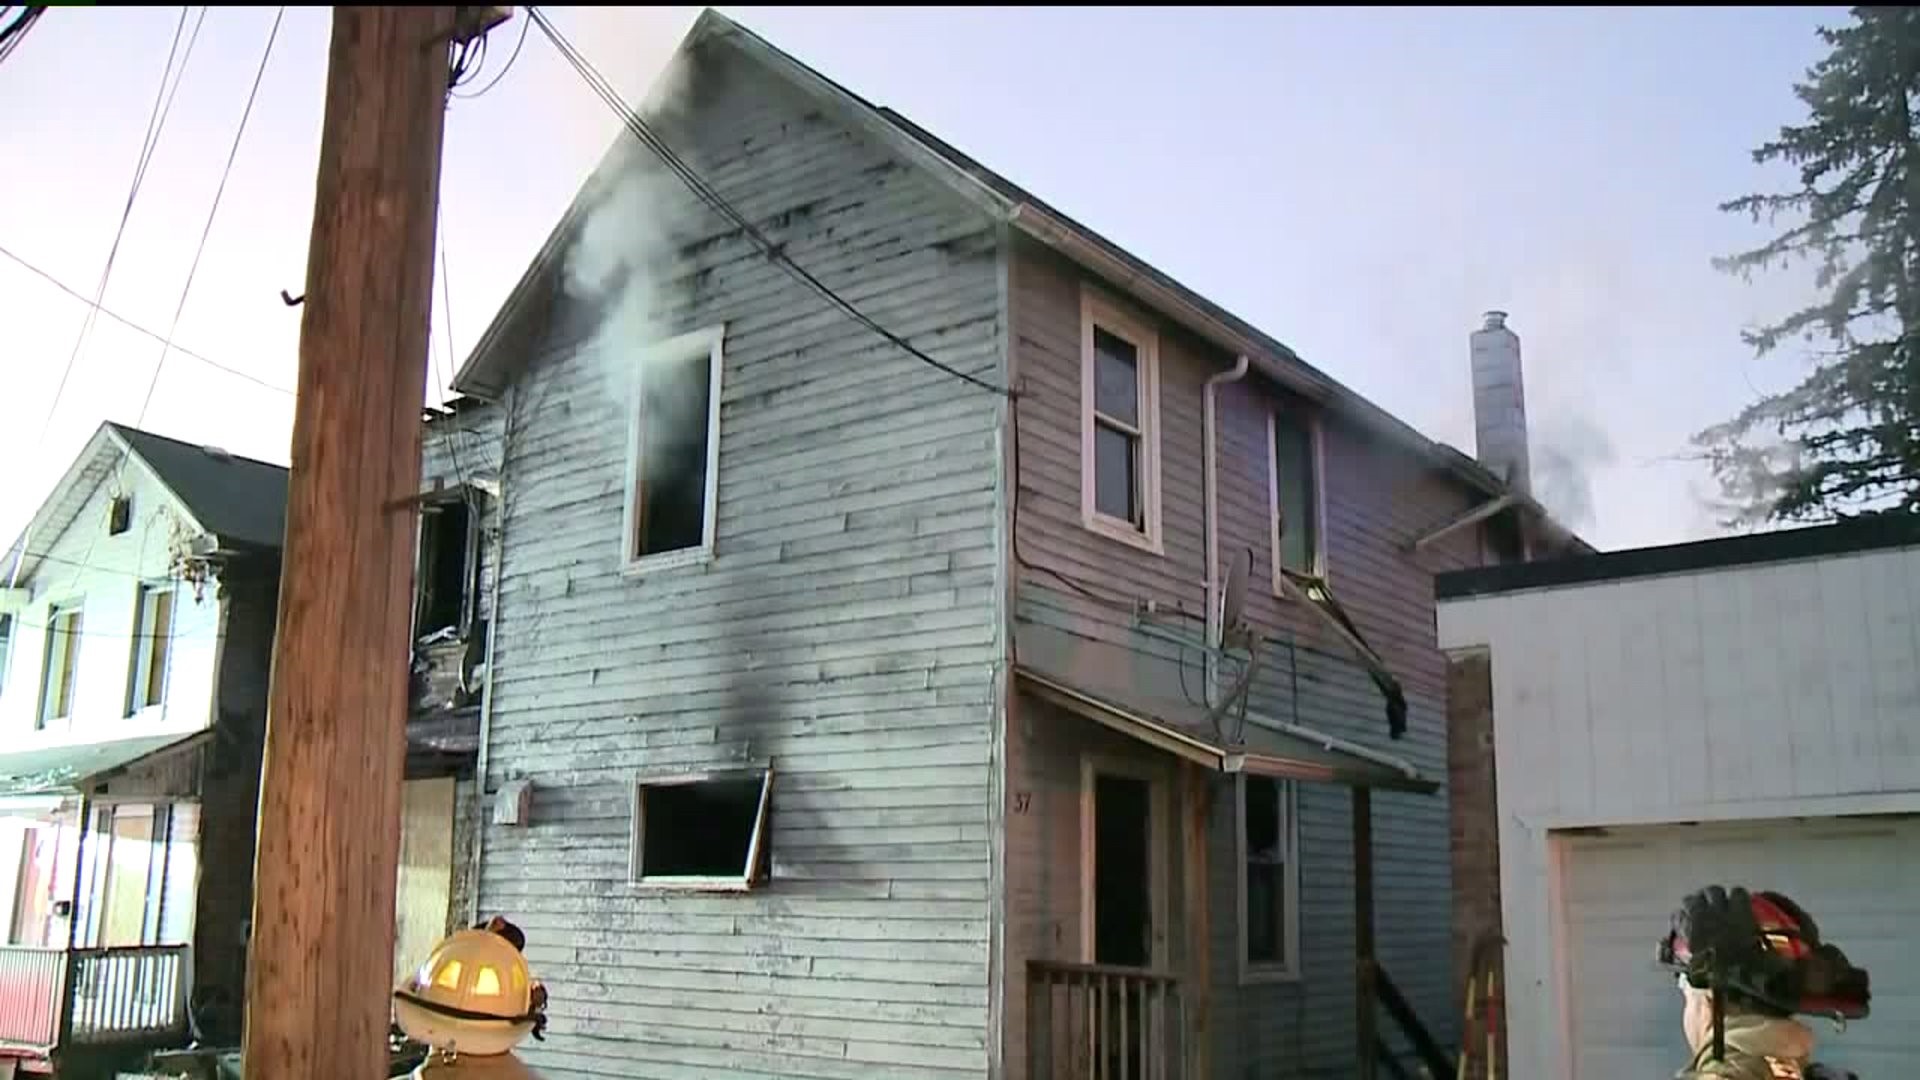 Fire Hits Vacant Home in Wilkes-Barre